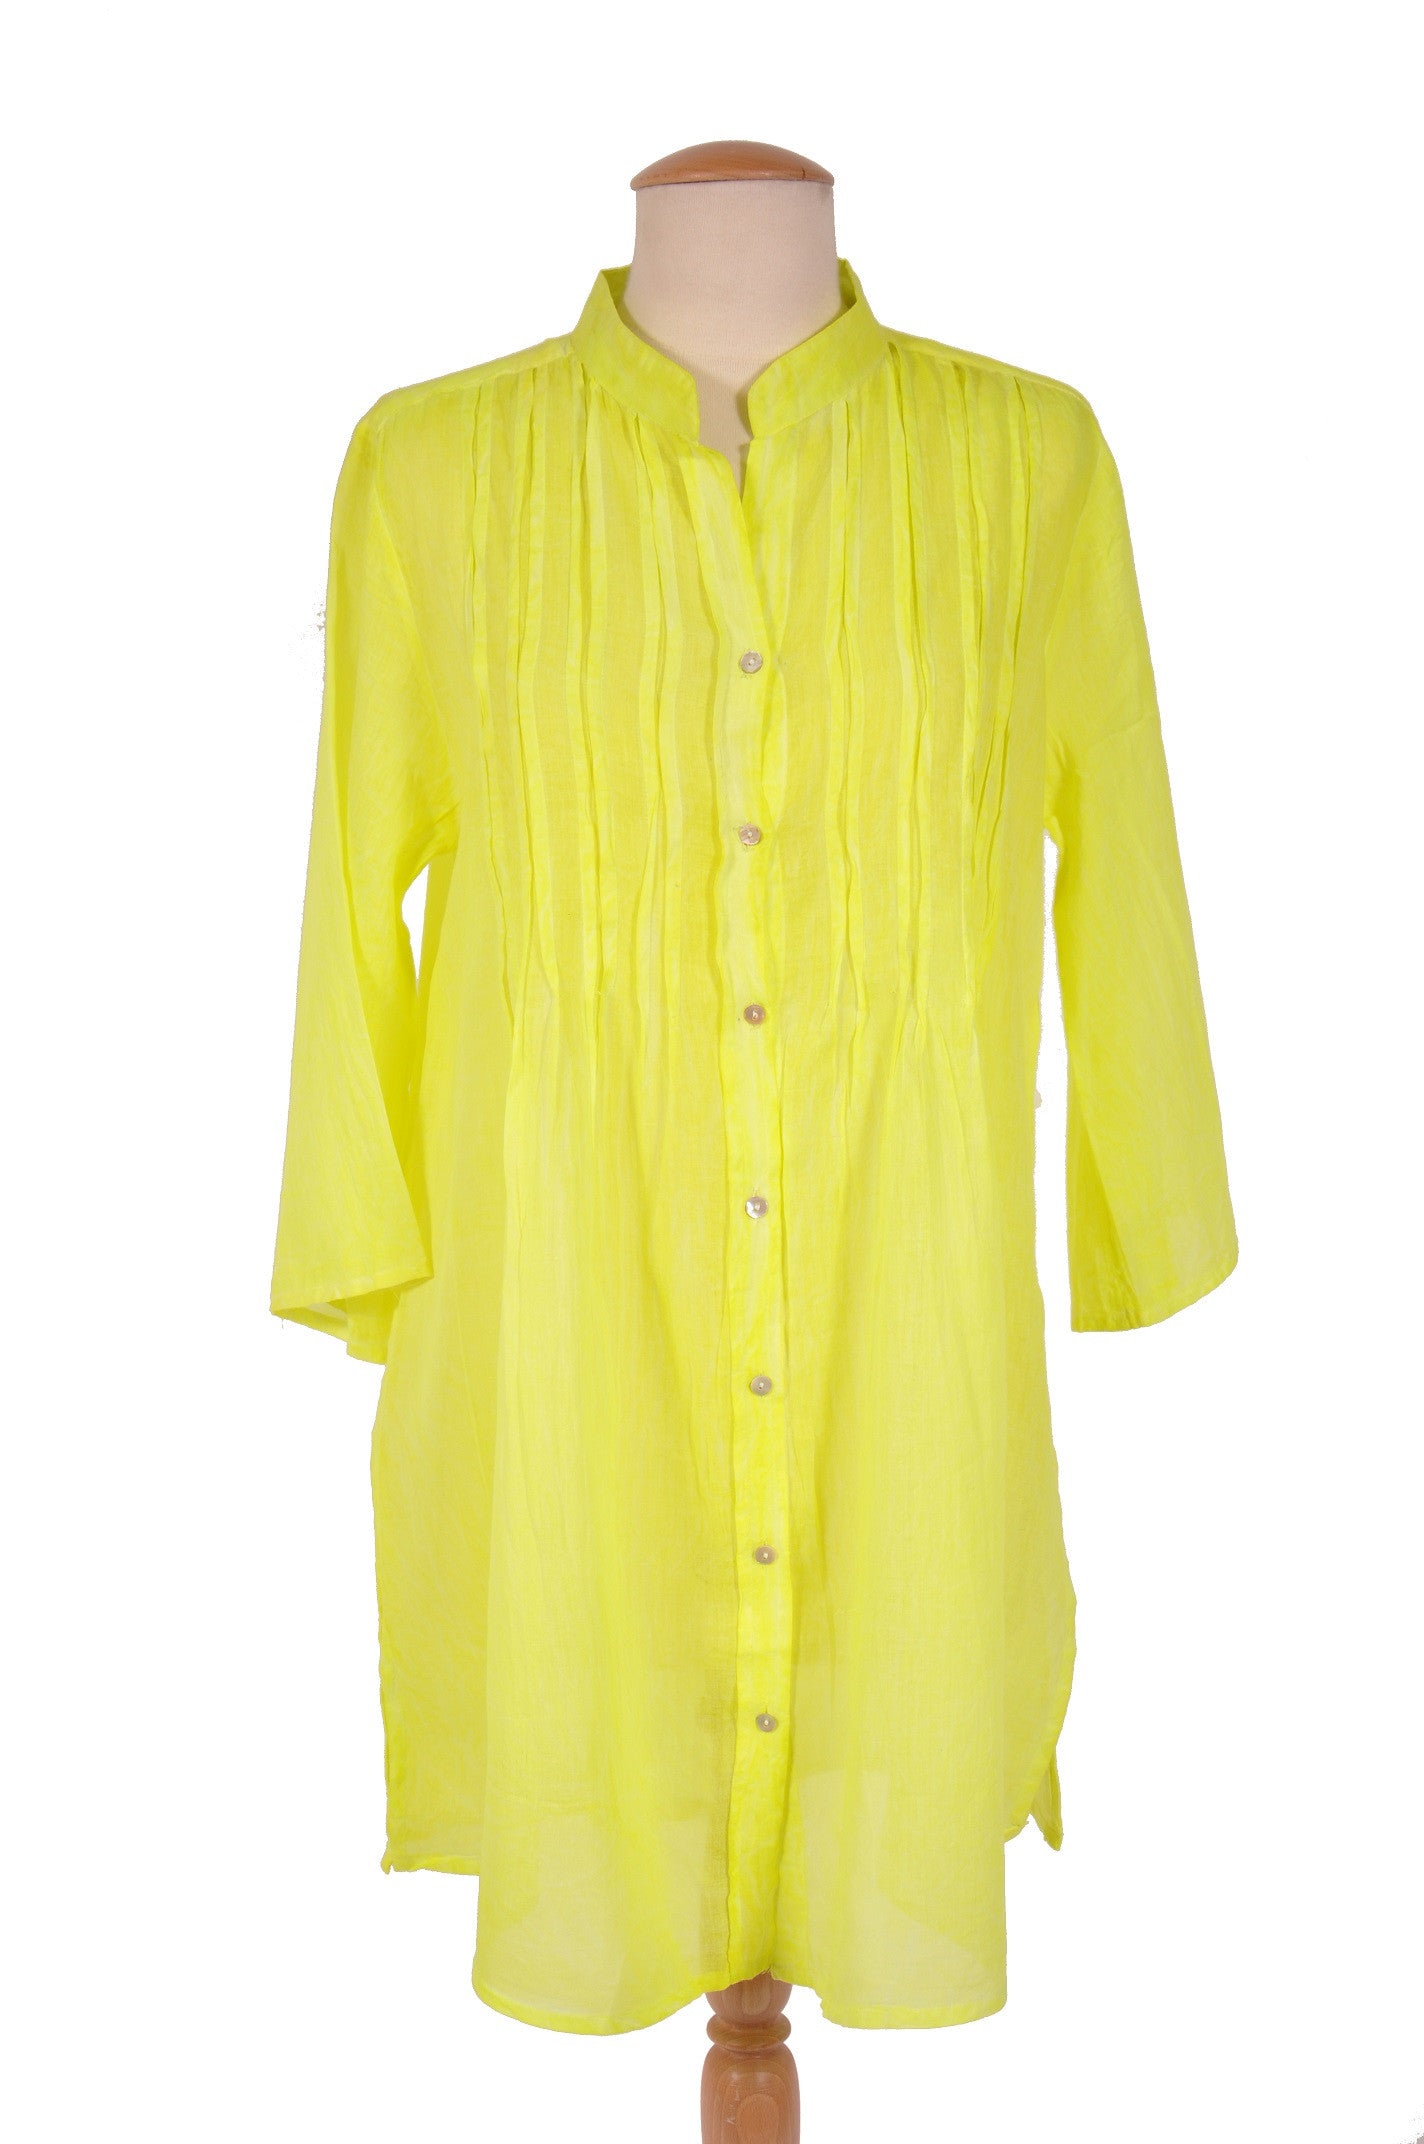 Tadpoles Presents Found Object: Paloma Lime Green Women's Tunic